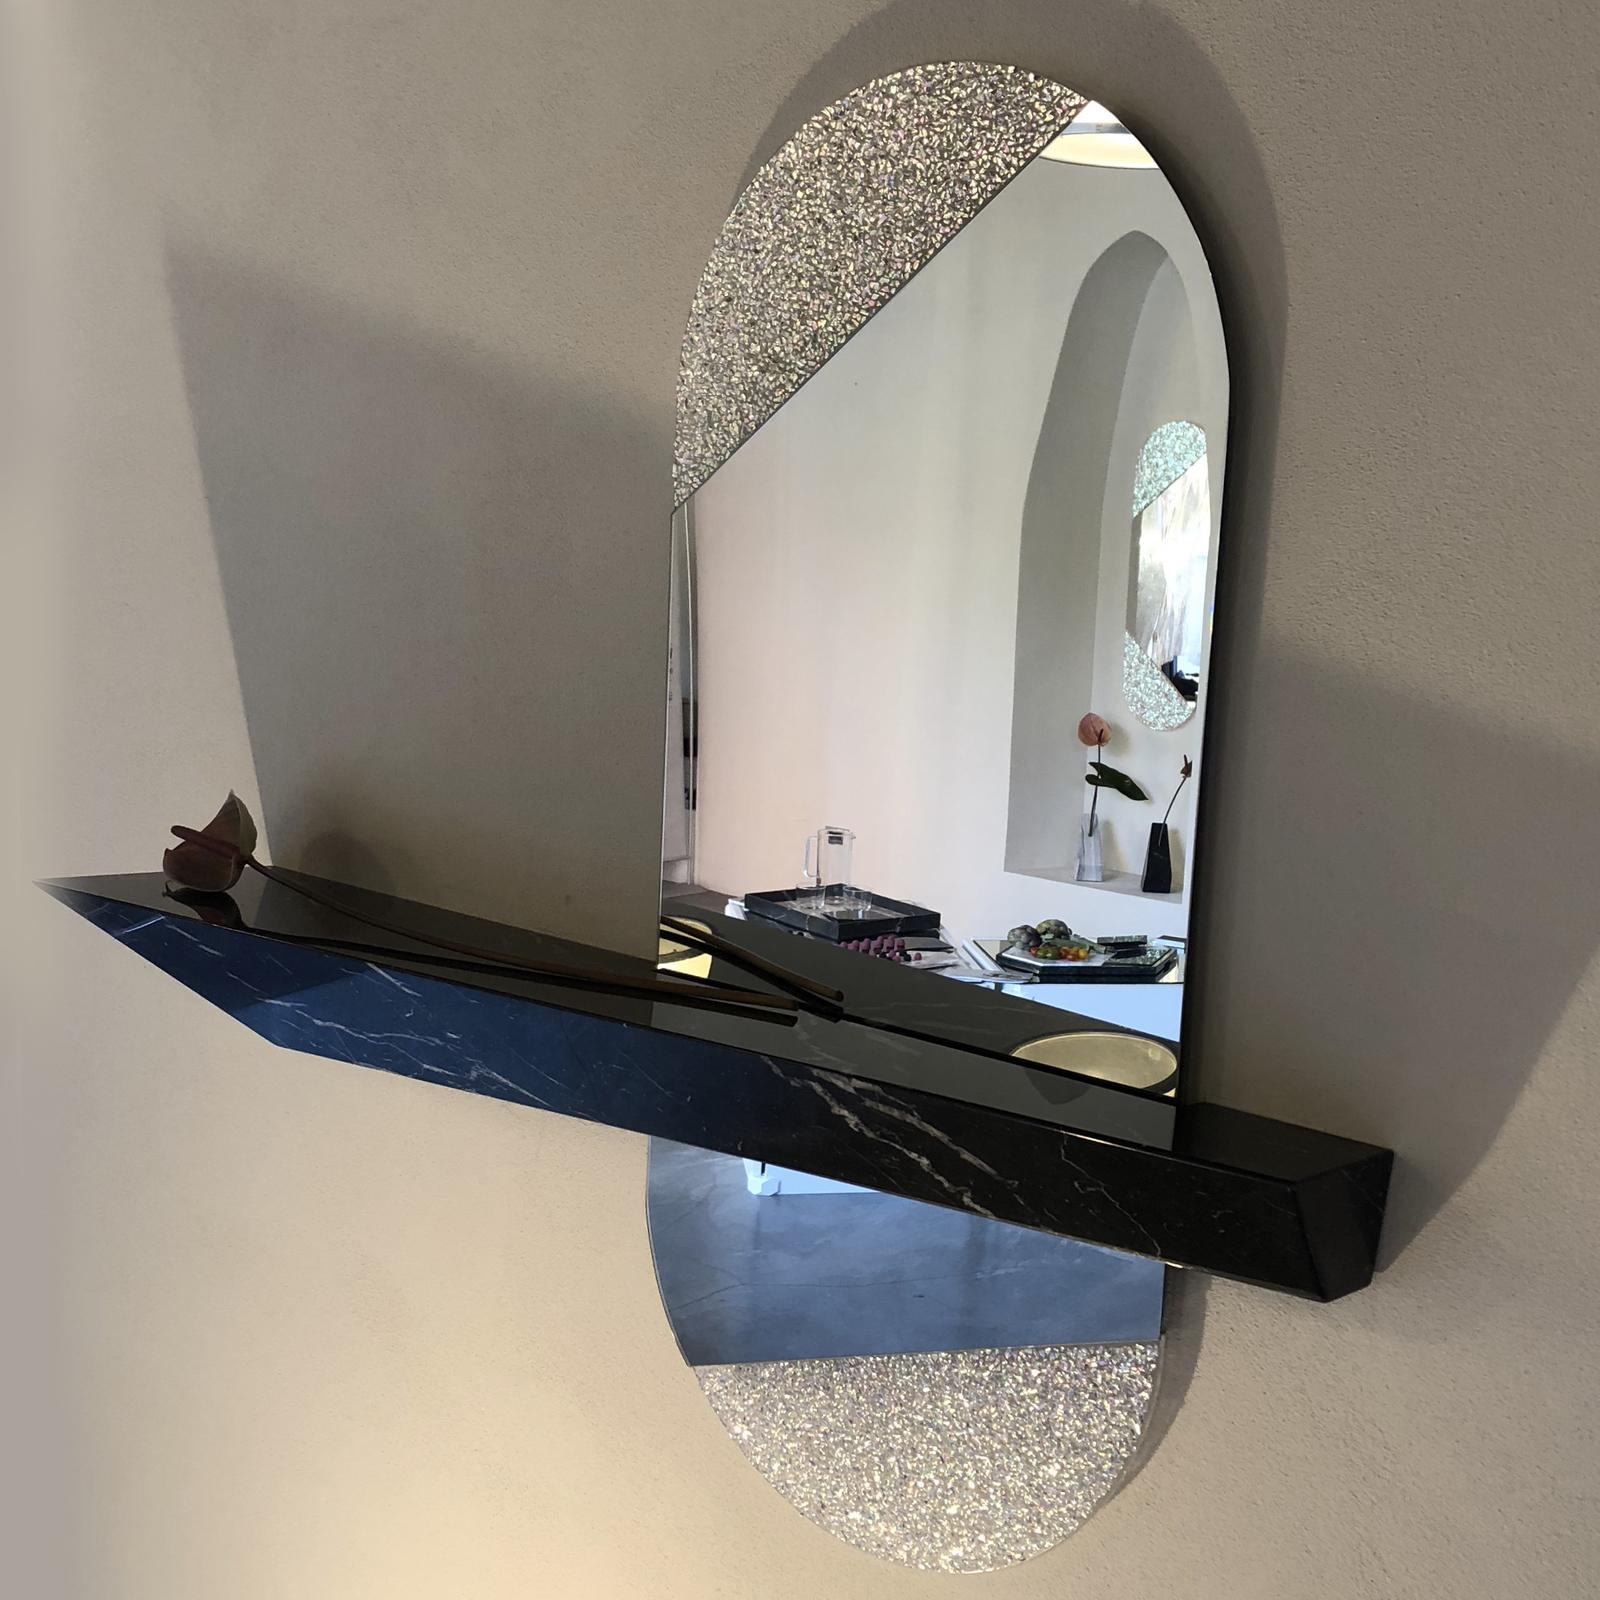 A stunning addition to a contemporary home, this mirror is a ideal welcoming piece to display in an entryway. It features a handmade black Marquina shelf with a shiny finish, shaped like an elongated prism that evokes the sophisticated outline of a